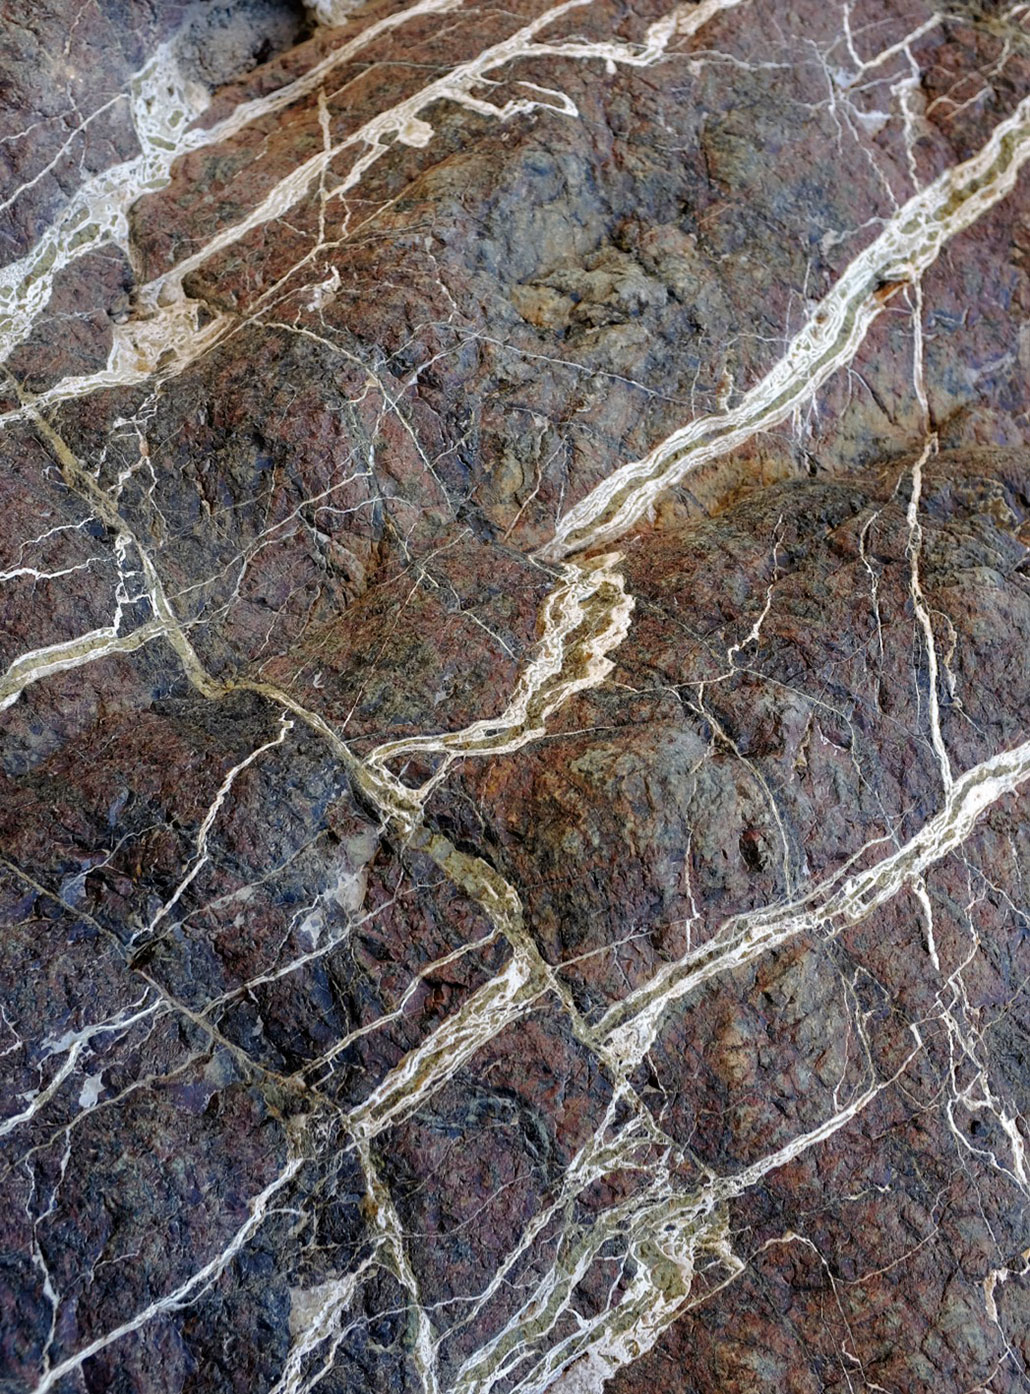 a close up view of white carbonate veins running through brown and green rock